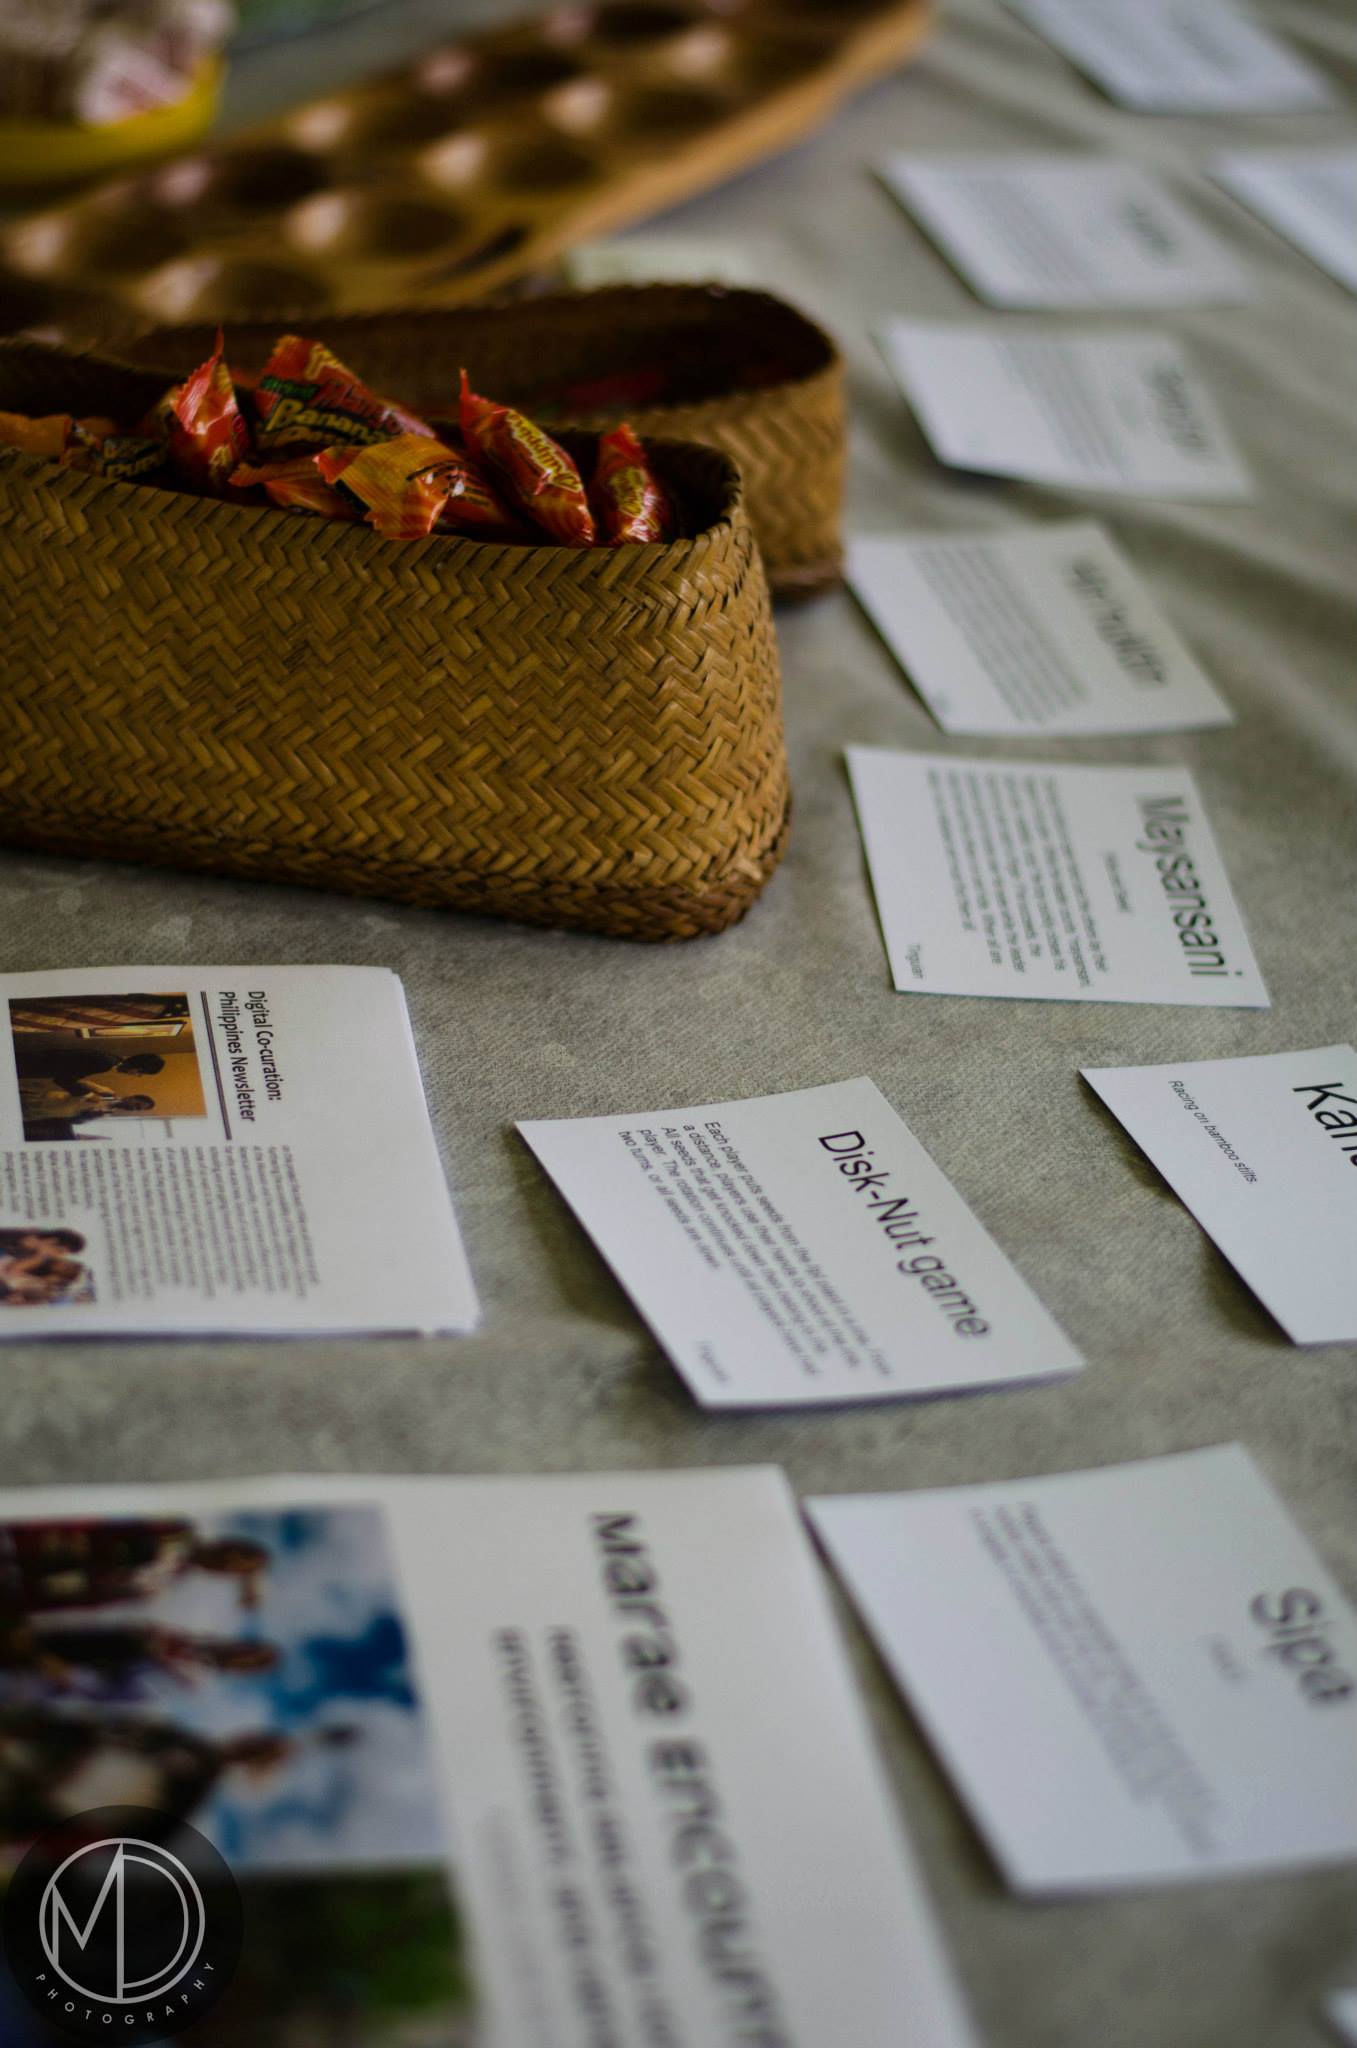 Close up of The Field Museum's table in the Cultural tent, covered with handouts, descriptions of traditional Filipino games, and a basket of candy. (c) Field Museum of Natural History - CC BY-NC 4.0